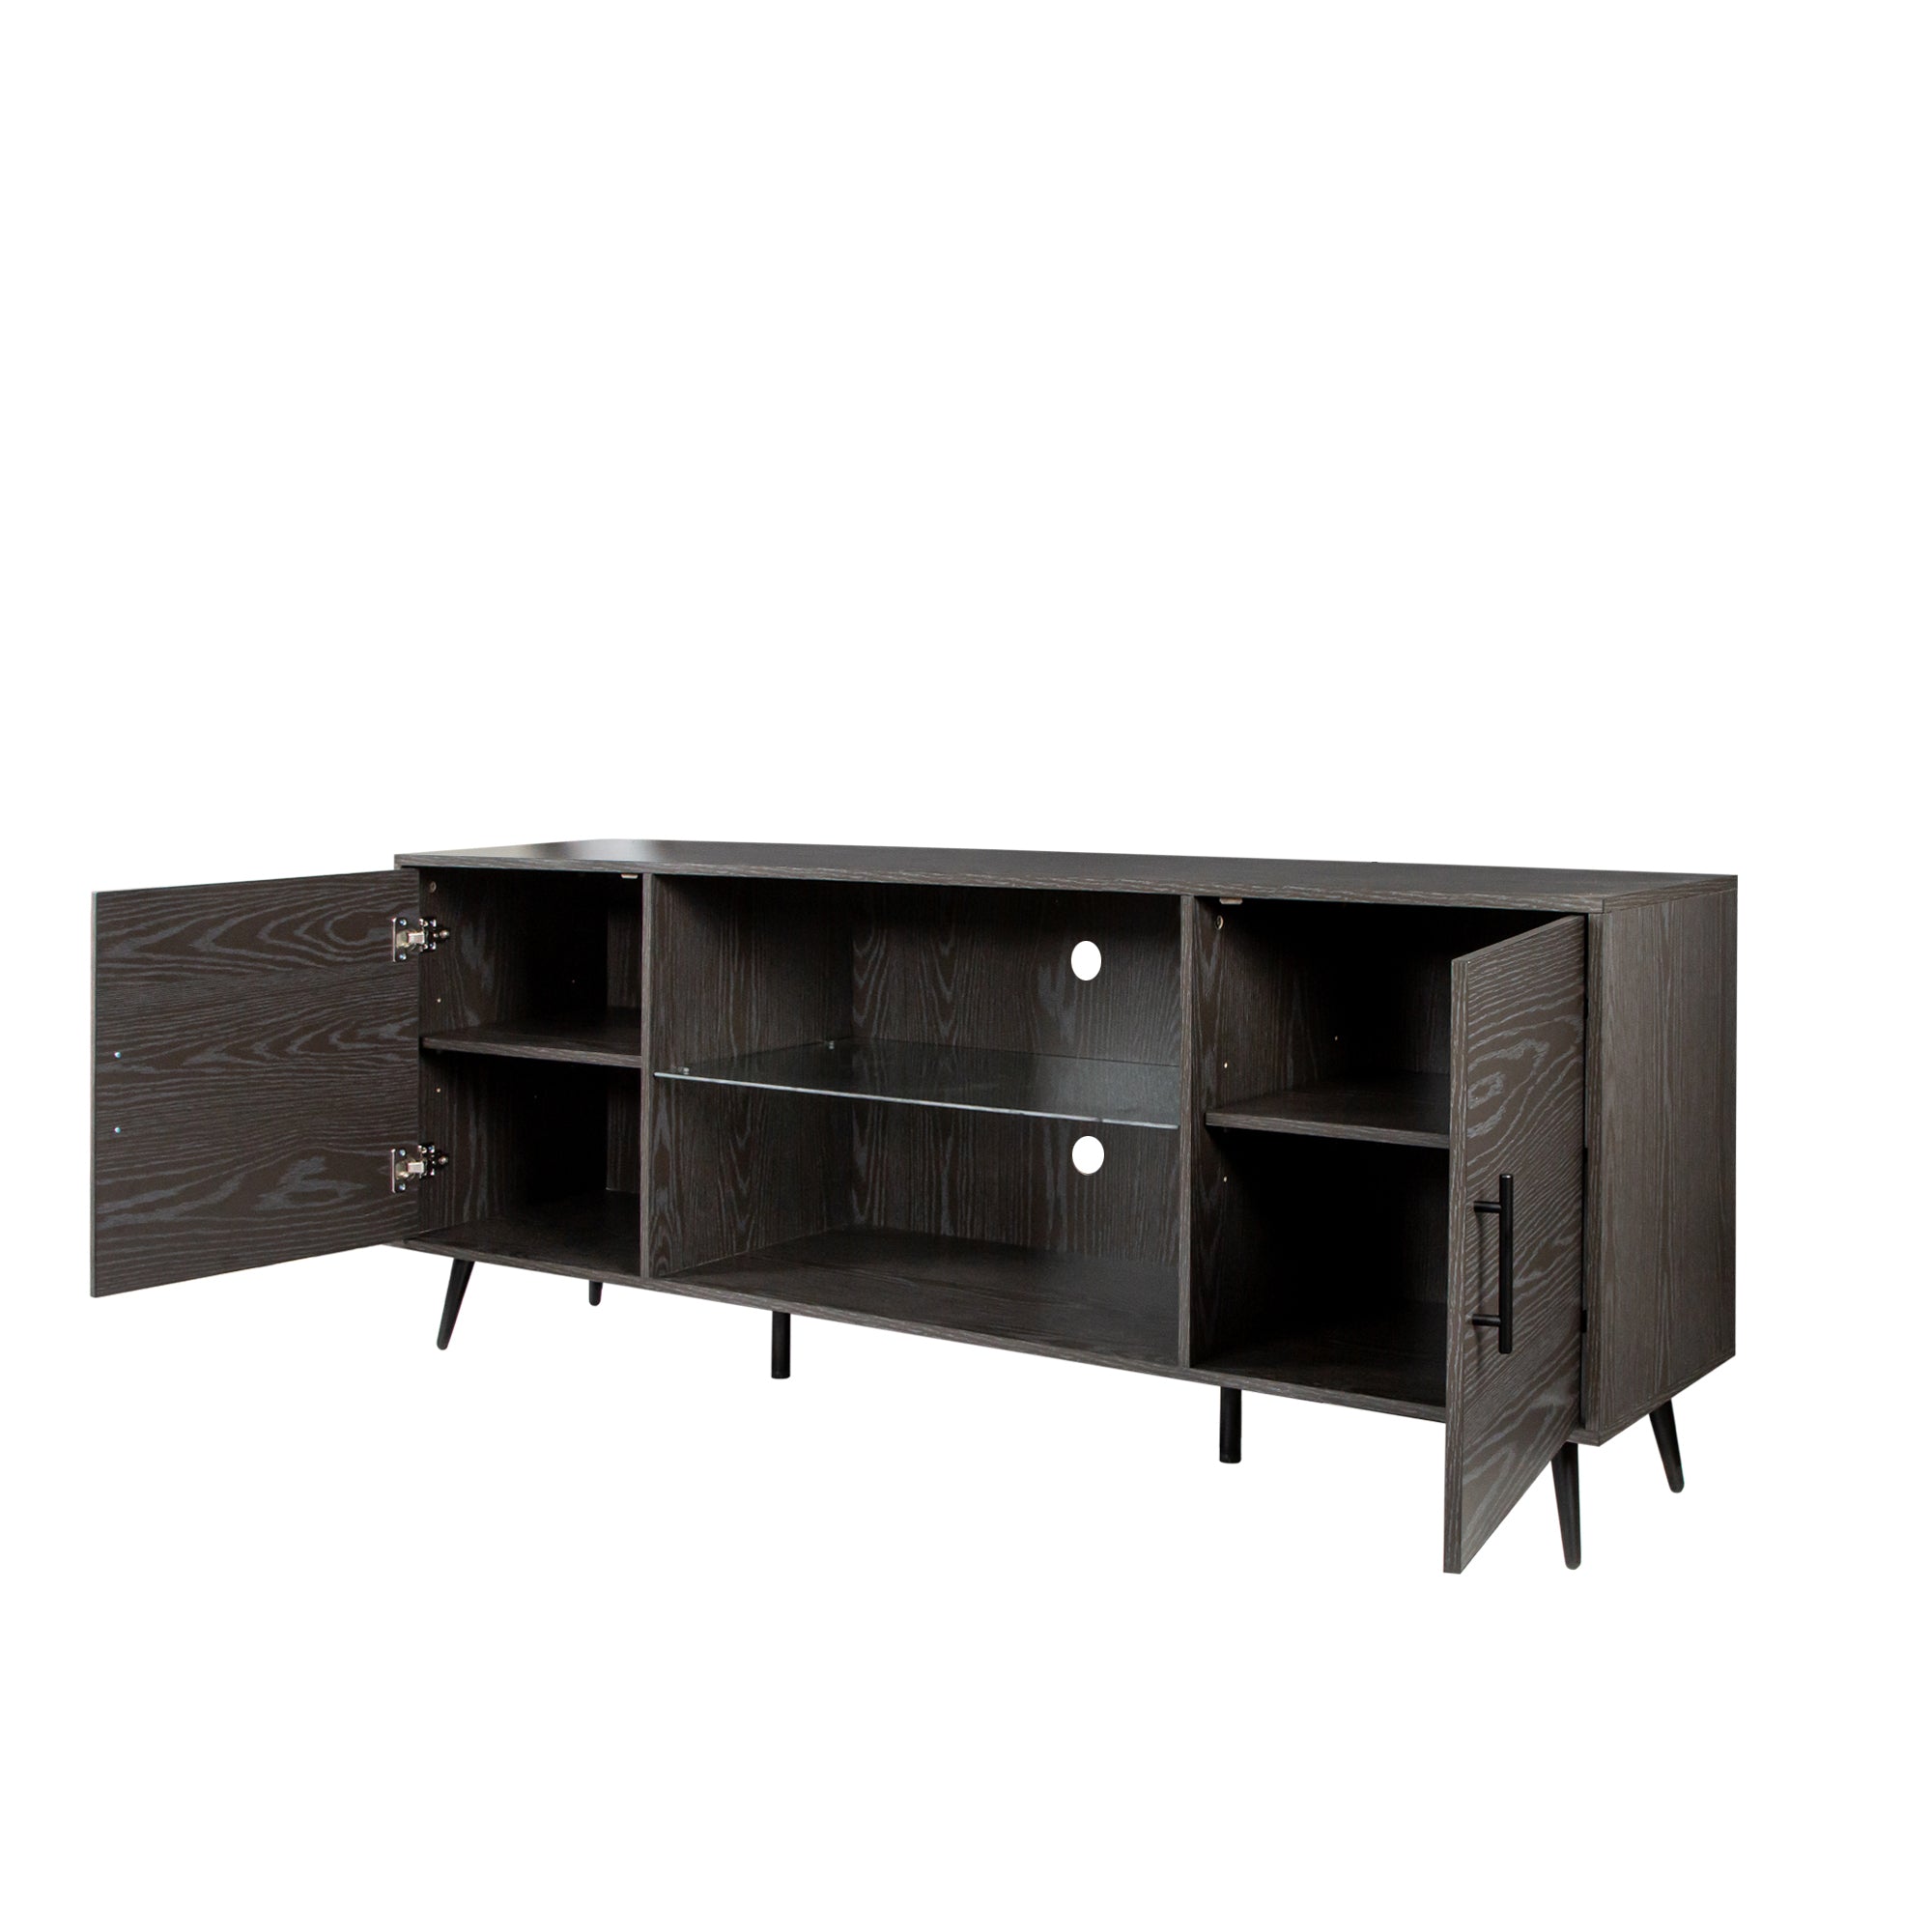 70.87" Dark Wenge TV Stand for TV up to 86"